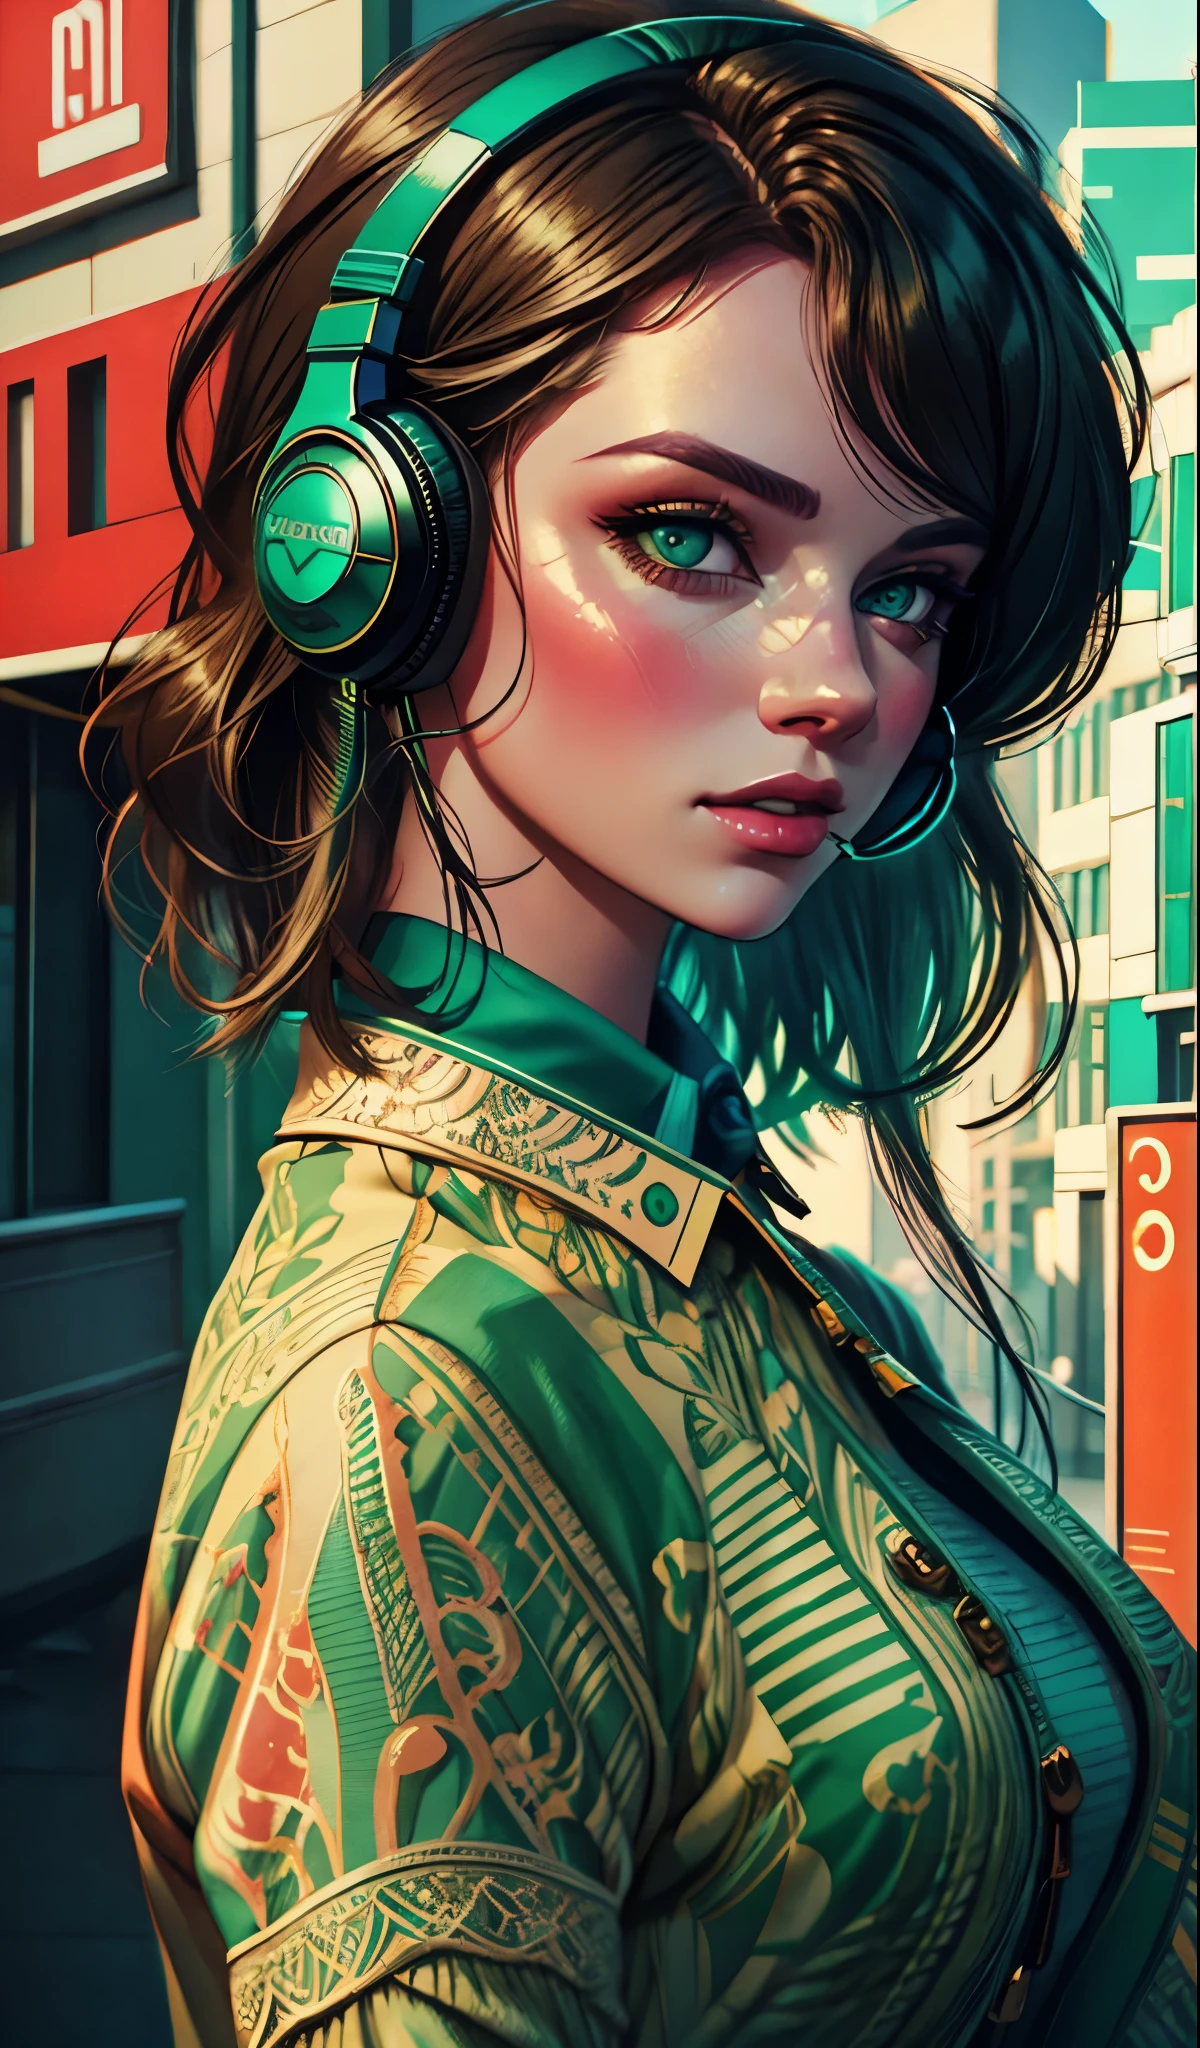 model girl wearing headphones, city background, emerald green eyes, intricate details, aesthetically pleasing pastel colors, poster background, art by conrad roset and ilya kuvshinov